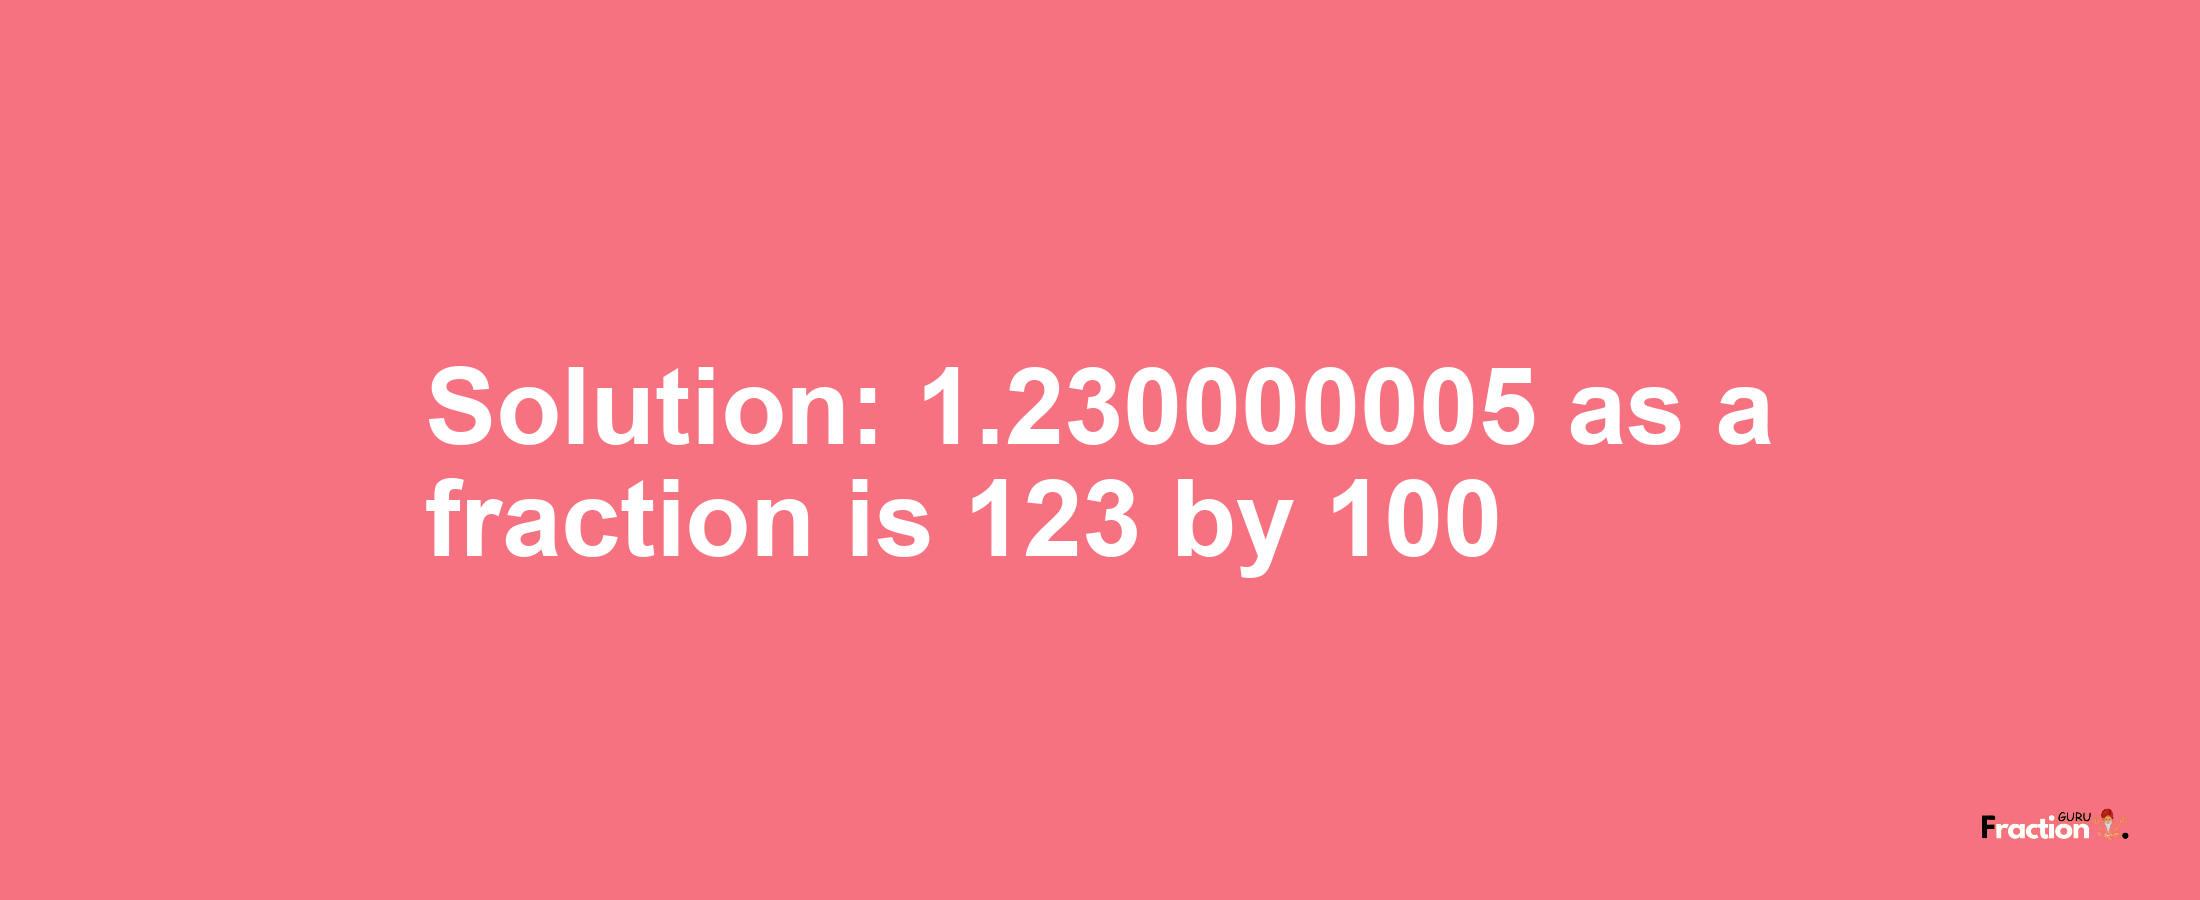 Solution:1.230000005 as a fraction is 123/100